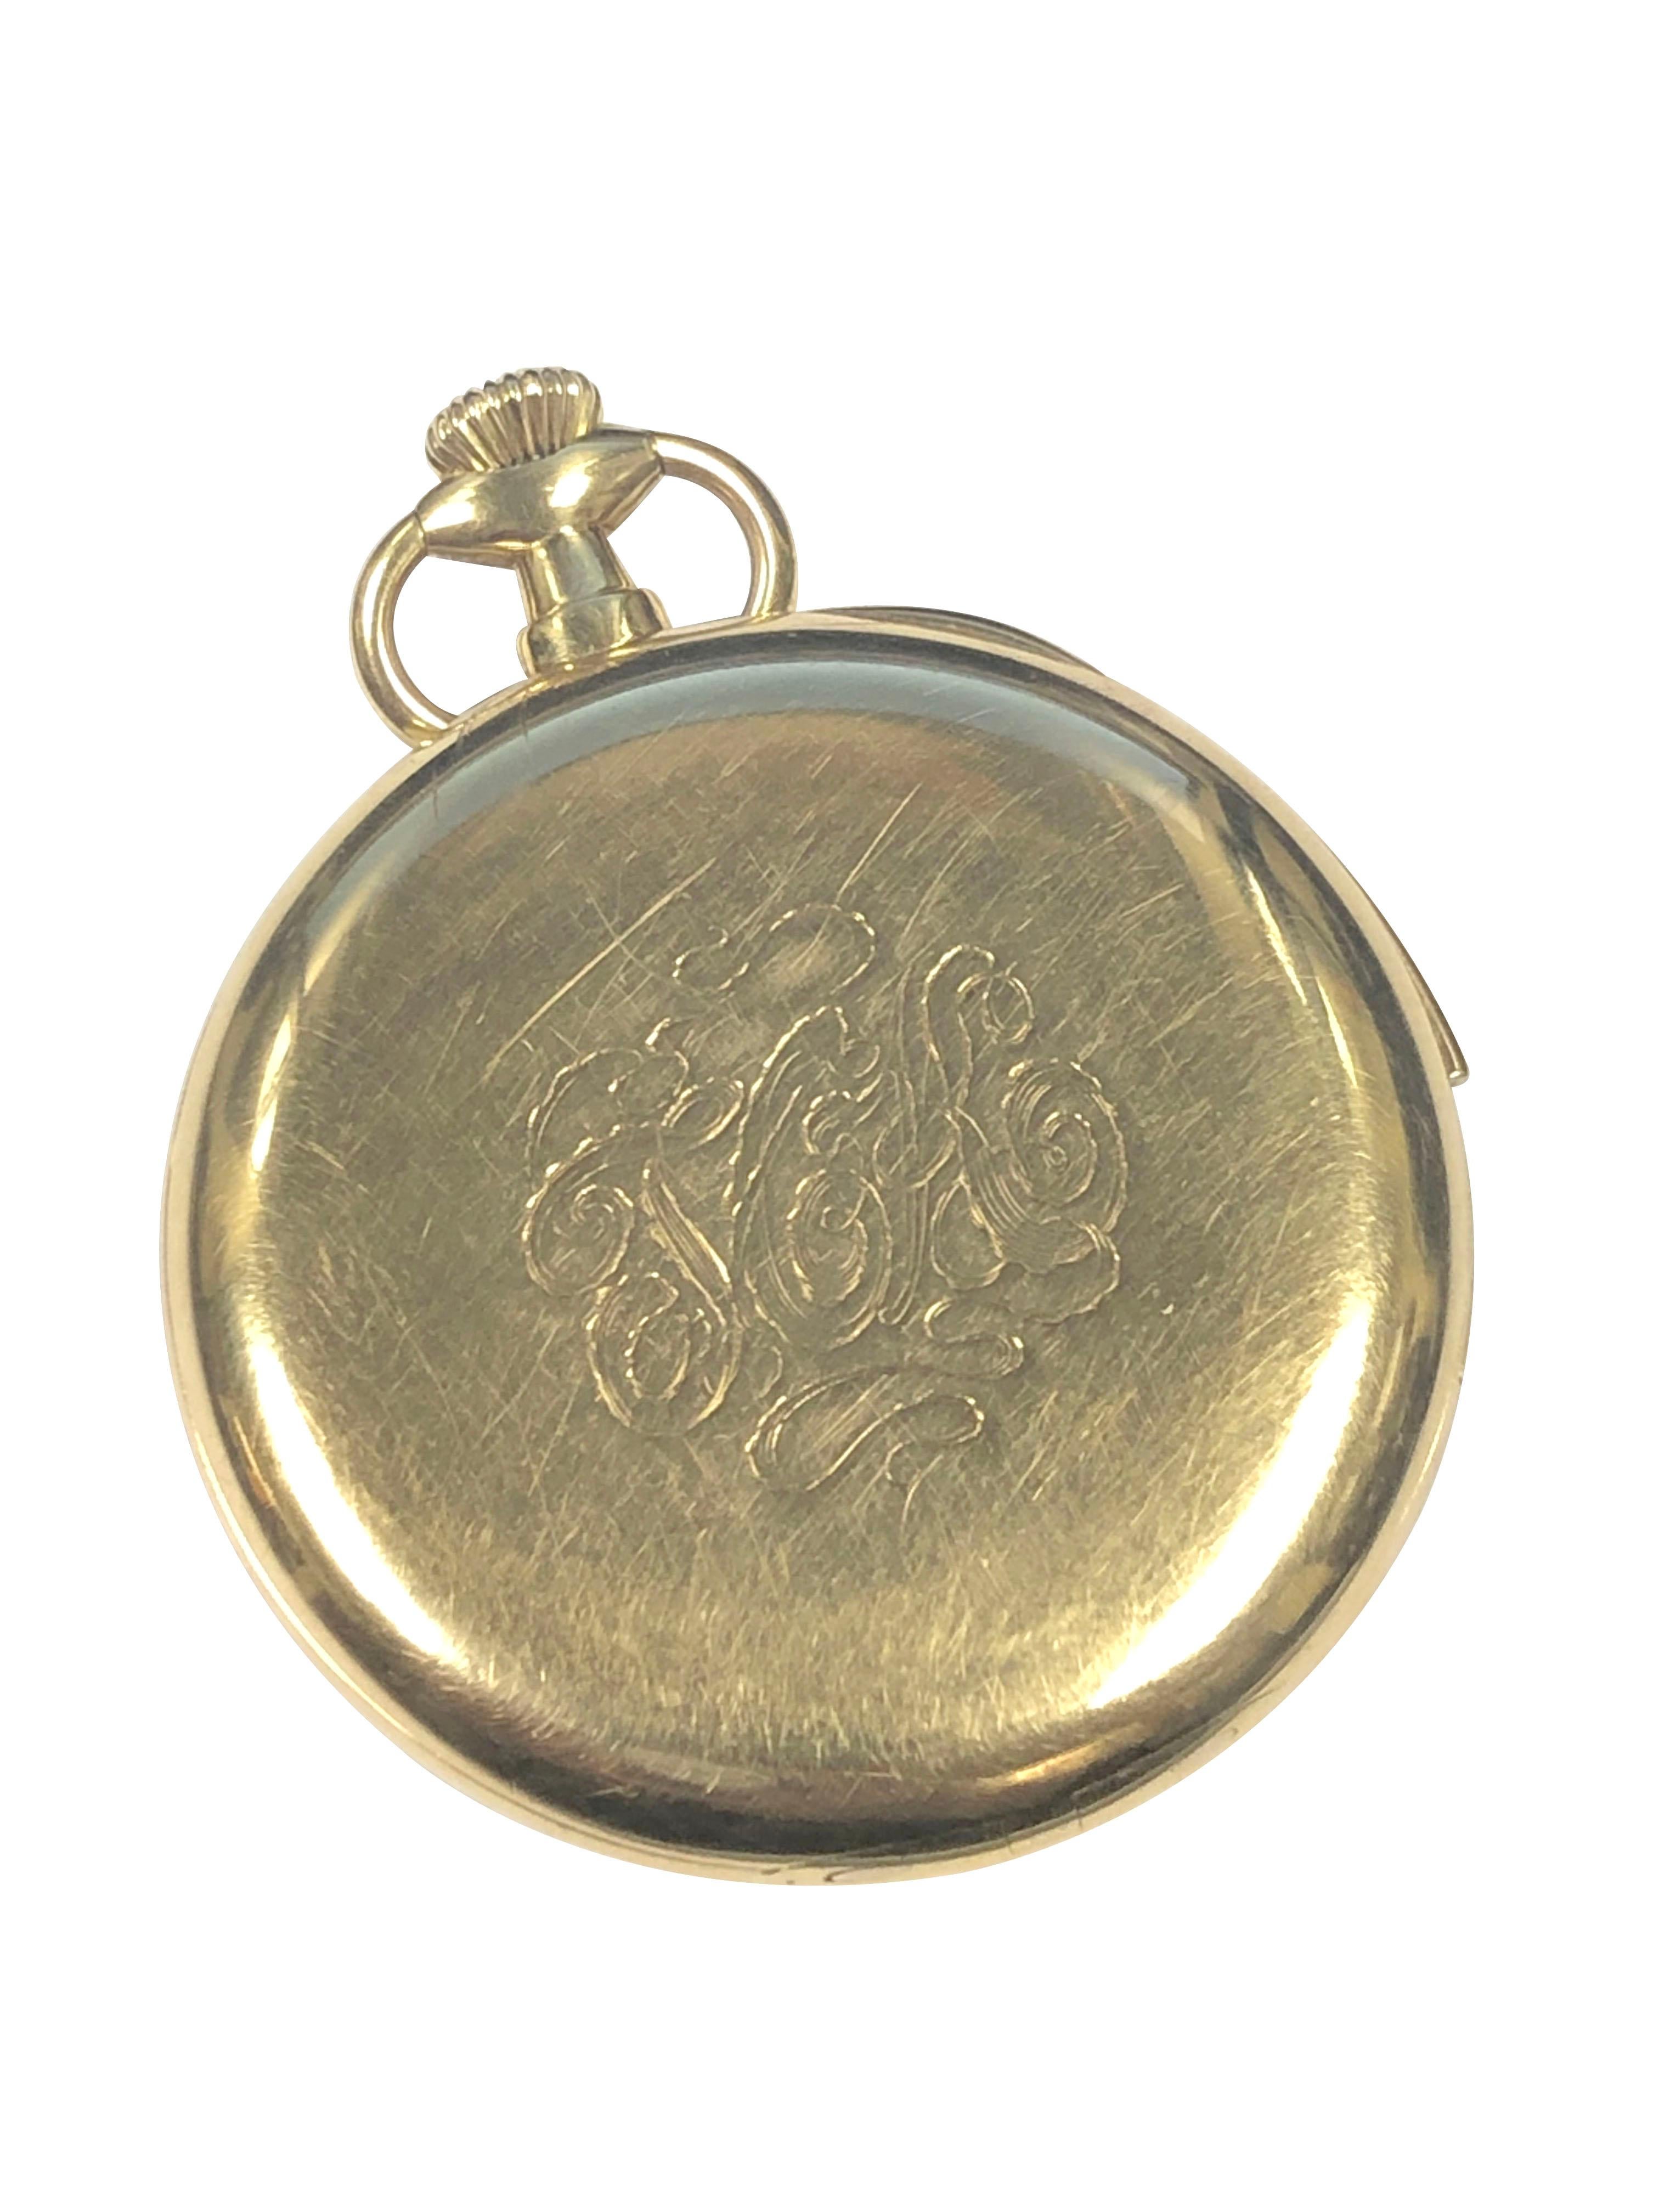 Circa 1910 J. E. Caldwell Minute Repeater Pocket Watch, 47 M.M. 18K Yellow Gold 3 piece case with Gold inside dust cover. Matt Gold dial with Engine turned center and a sub seconds chapter. High Grade, Highly Jeweled movement possibly Meylan or